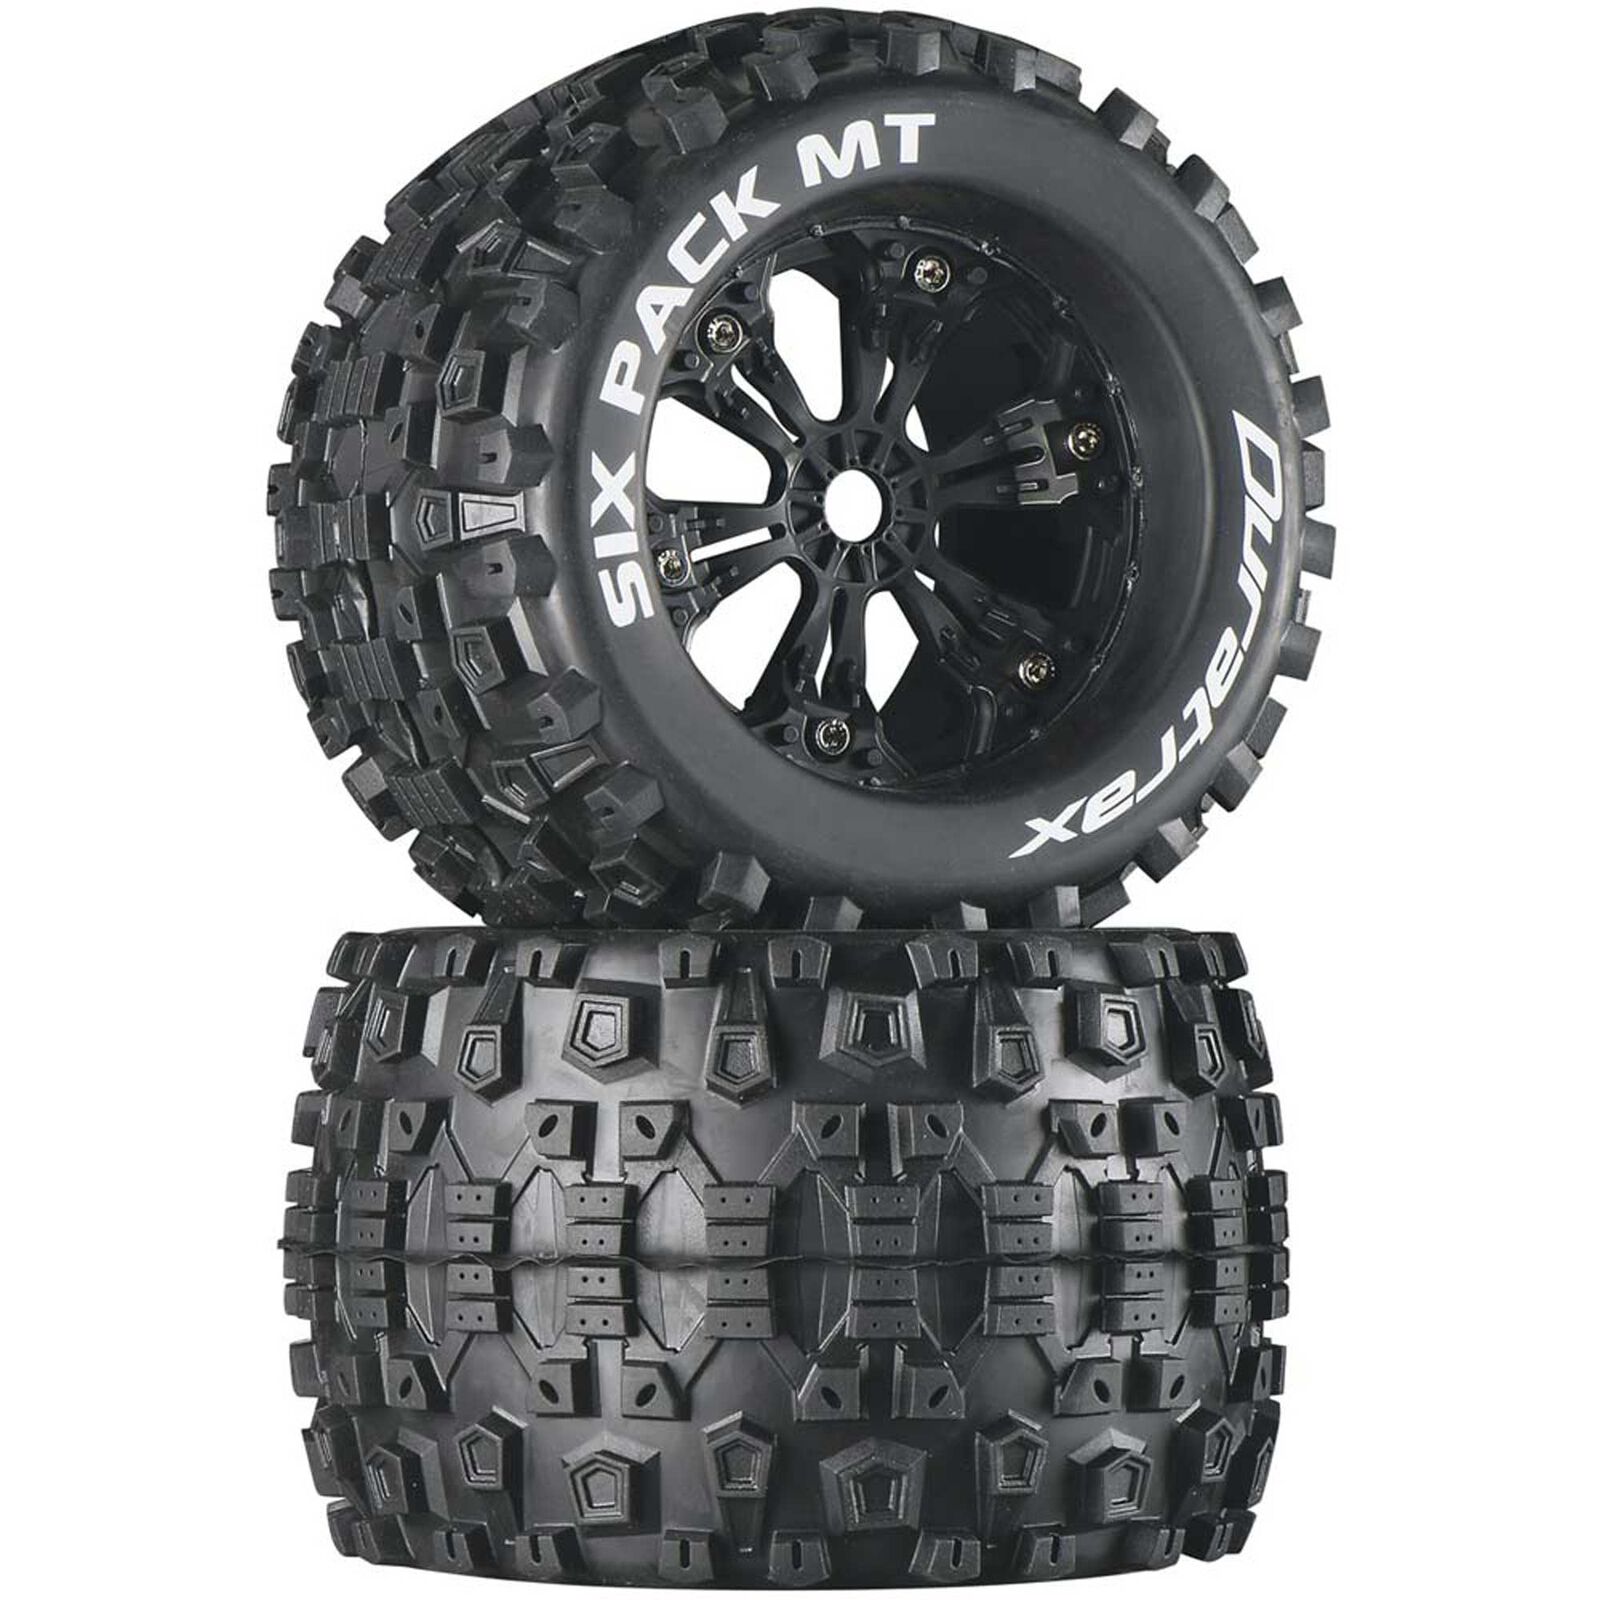 Six-Pack MT 3.8" Mounted Tires, Black (2)